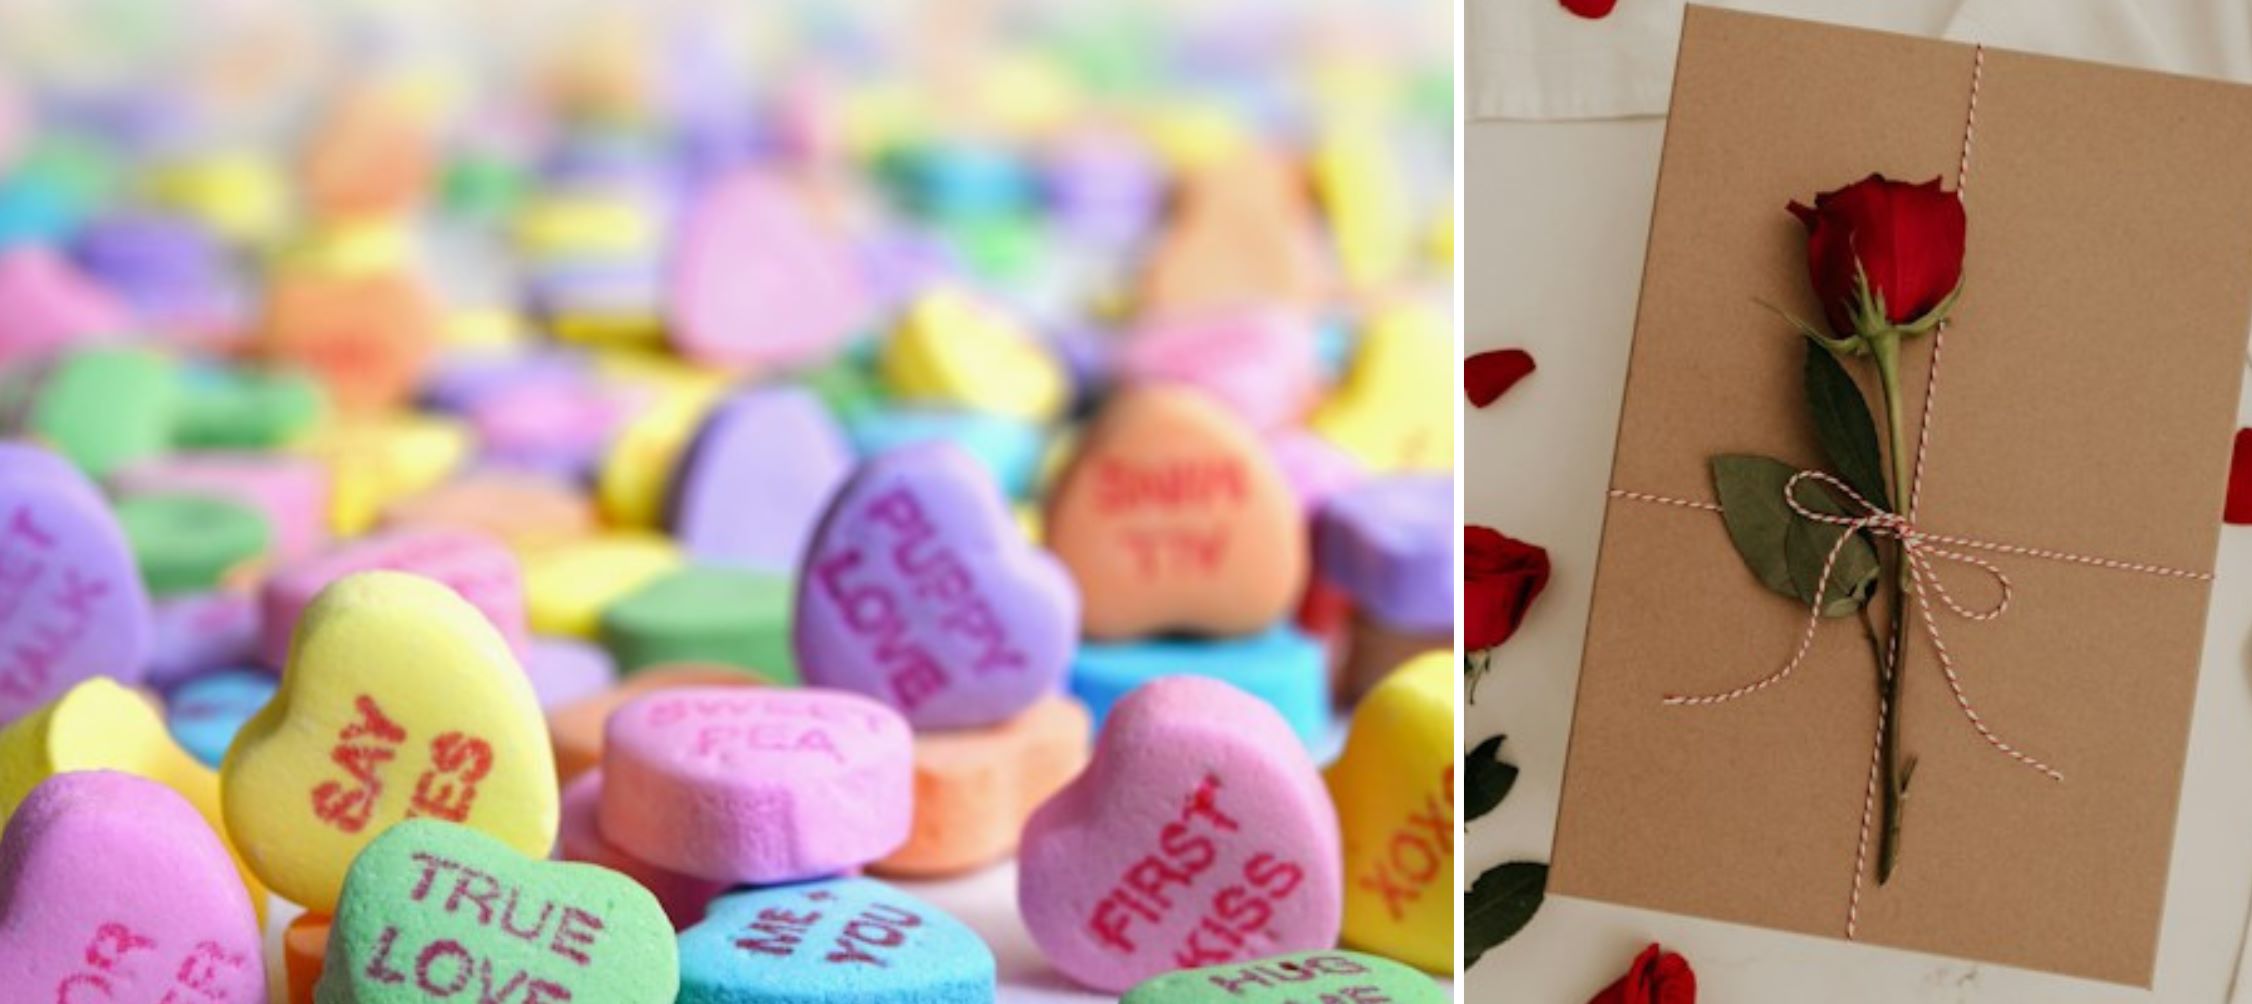 The Most Romantic Valentine’s Day Ideas in Los Angeles